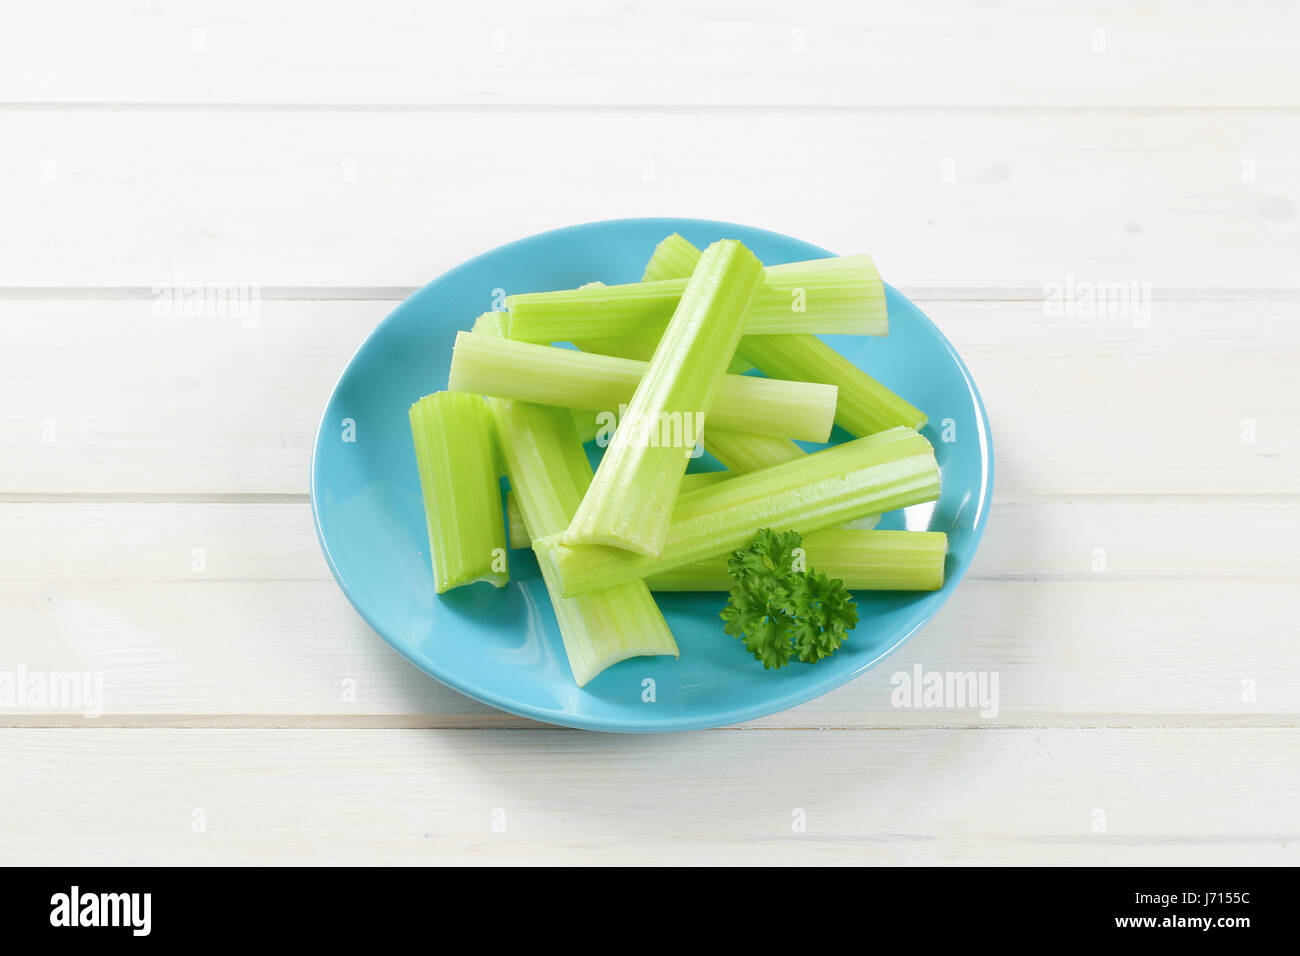 plate of green celery stems on white wooden background Stock Photo